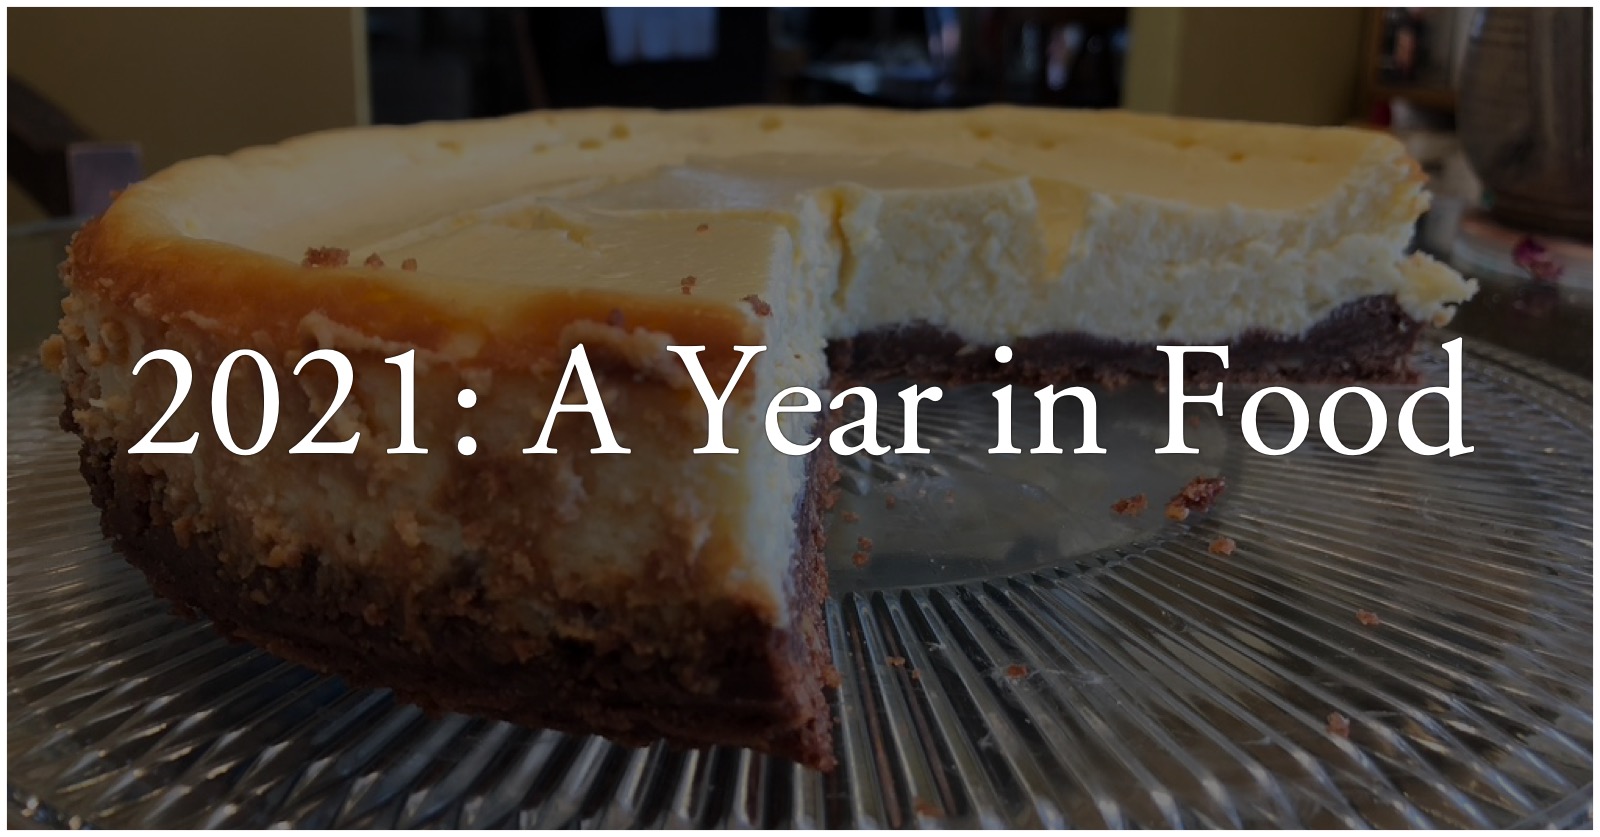 2021: A Year in Food